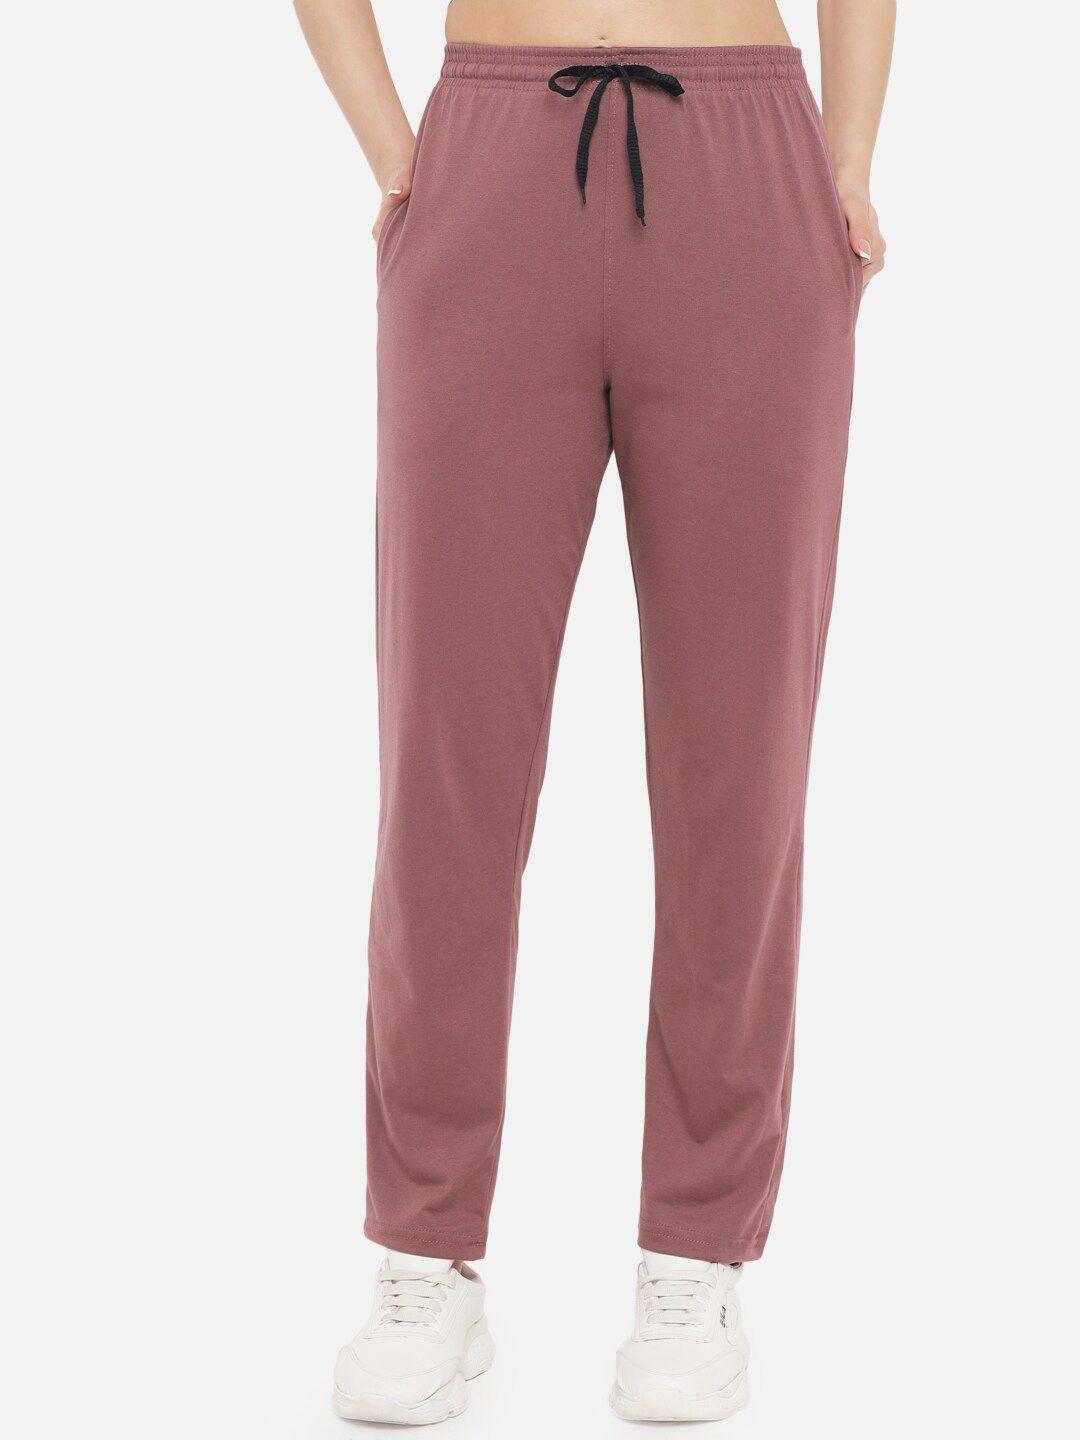 fflirtygo-women-lavender-solid-relaxed-fit-cotton-track-pants